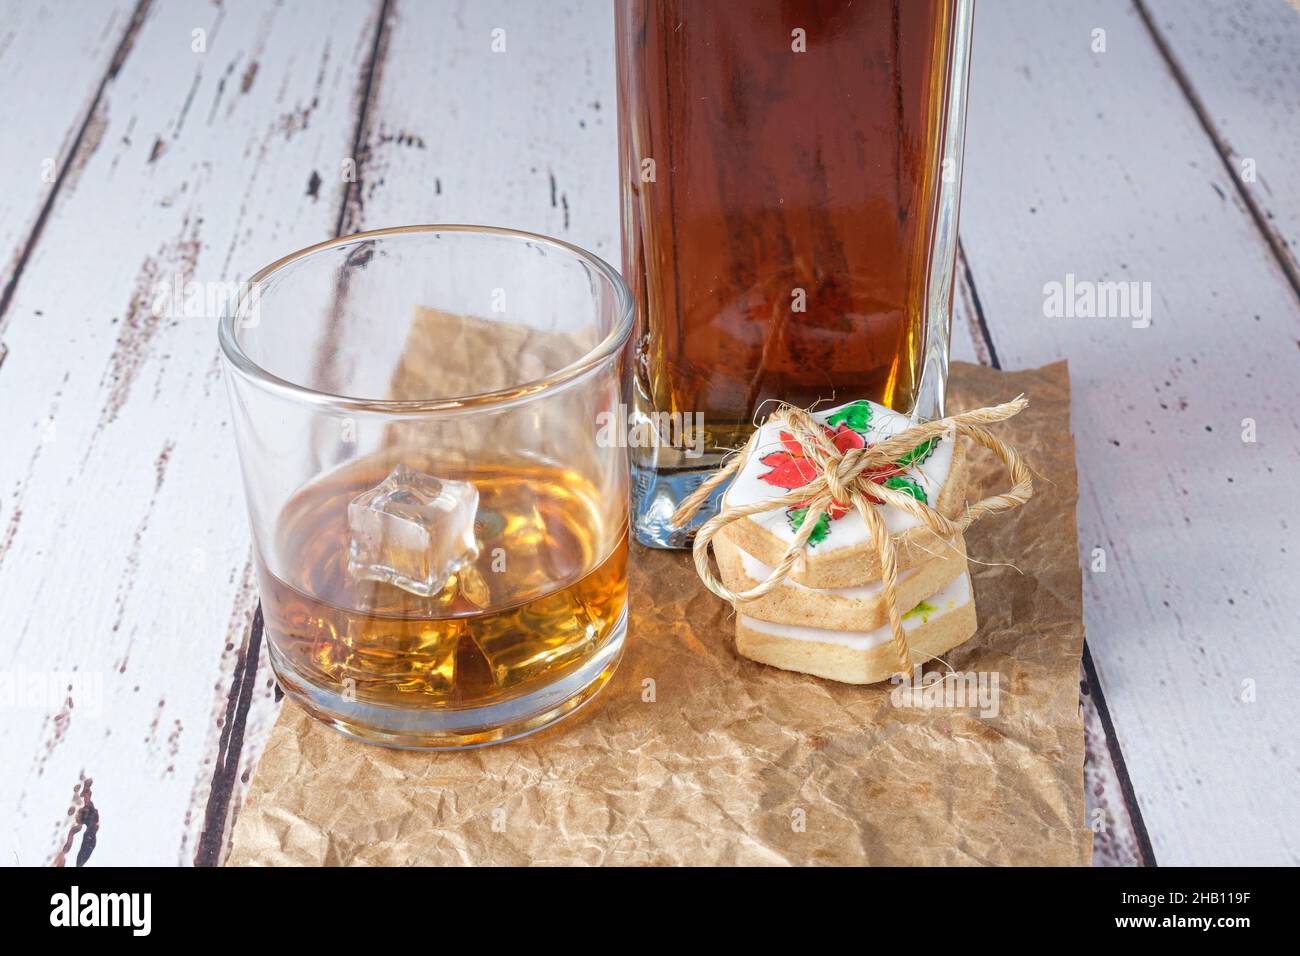 Glass of whiskey with ice on brown paper next to buttery cookies. Stock Photo